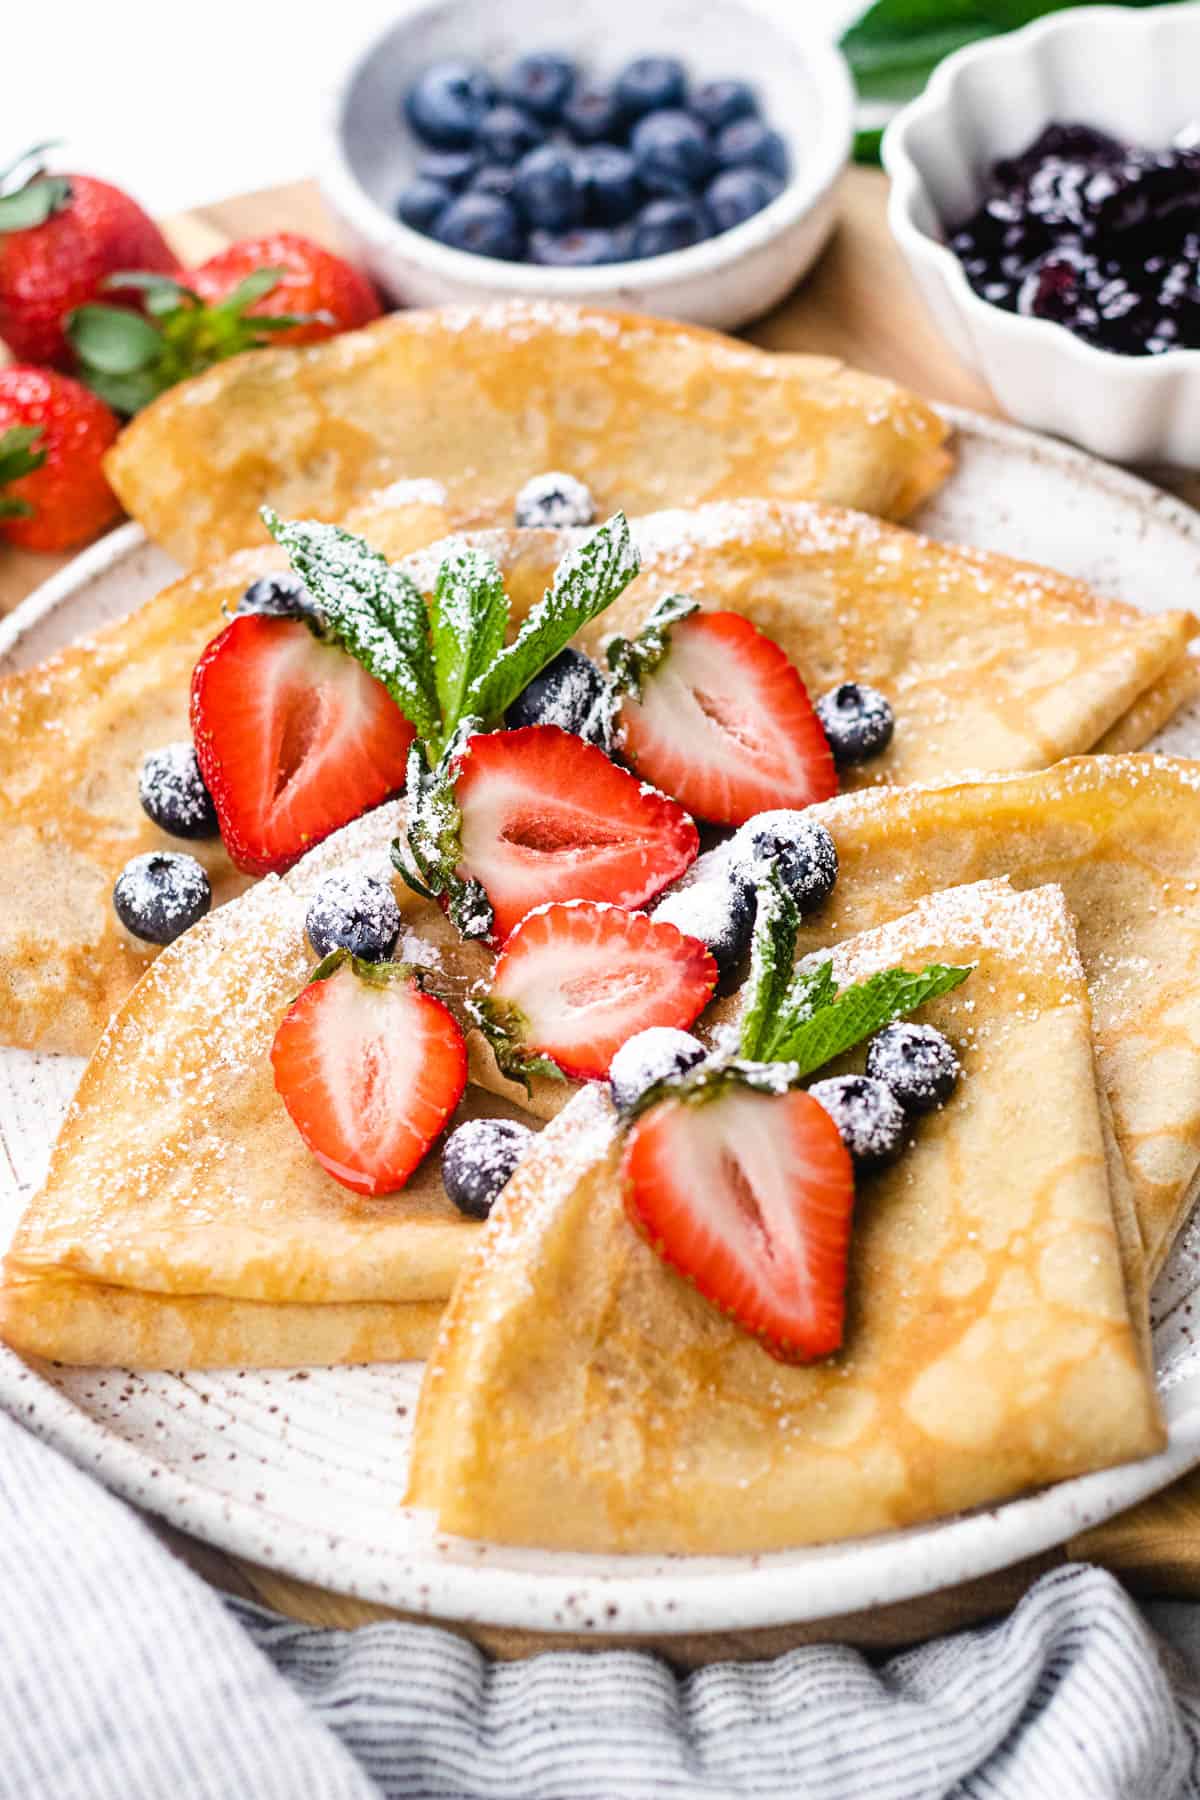 Classic Crepes: A Simple Recipe for Thin Pancakes